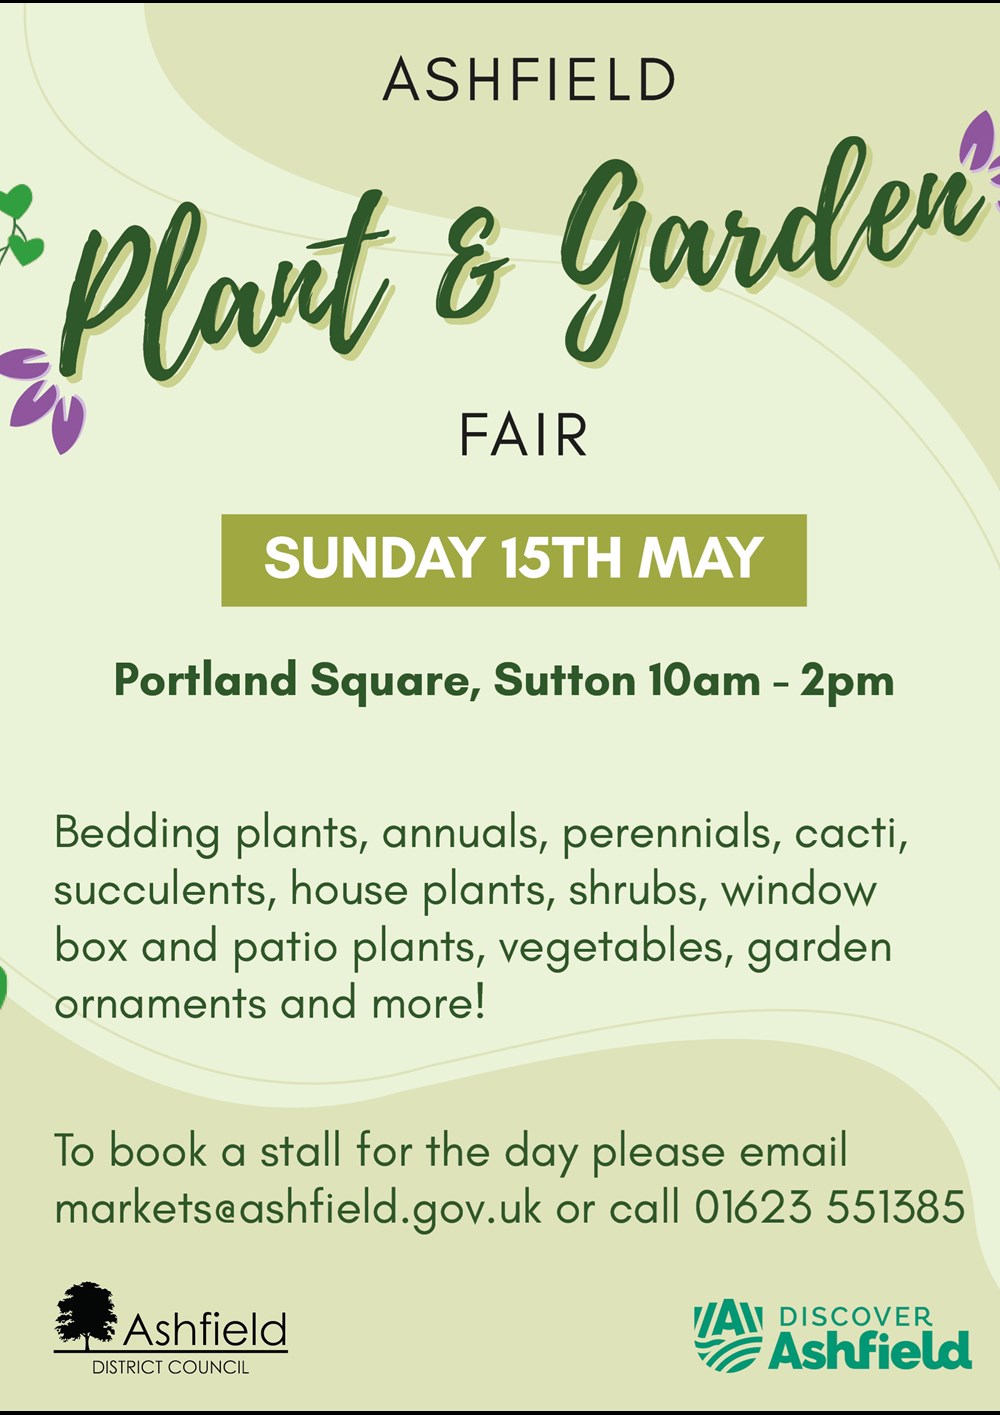 Advertisment/ banner with name, dates and time of ashfield plant and garden show.